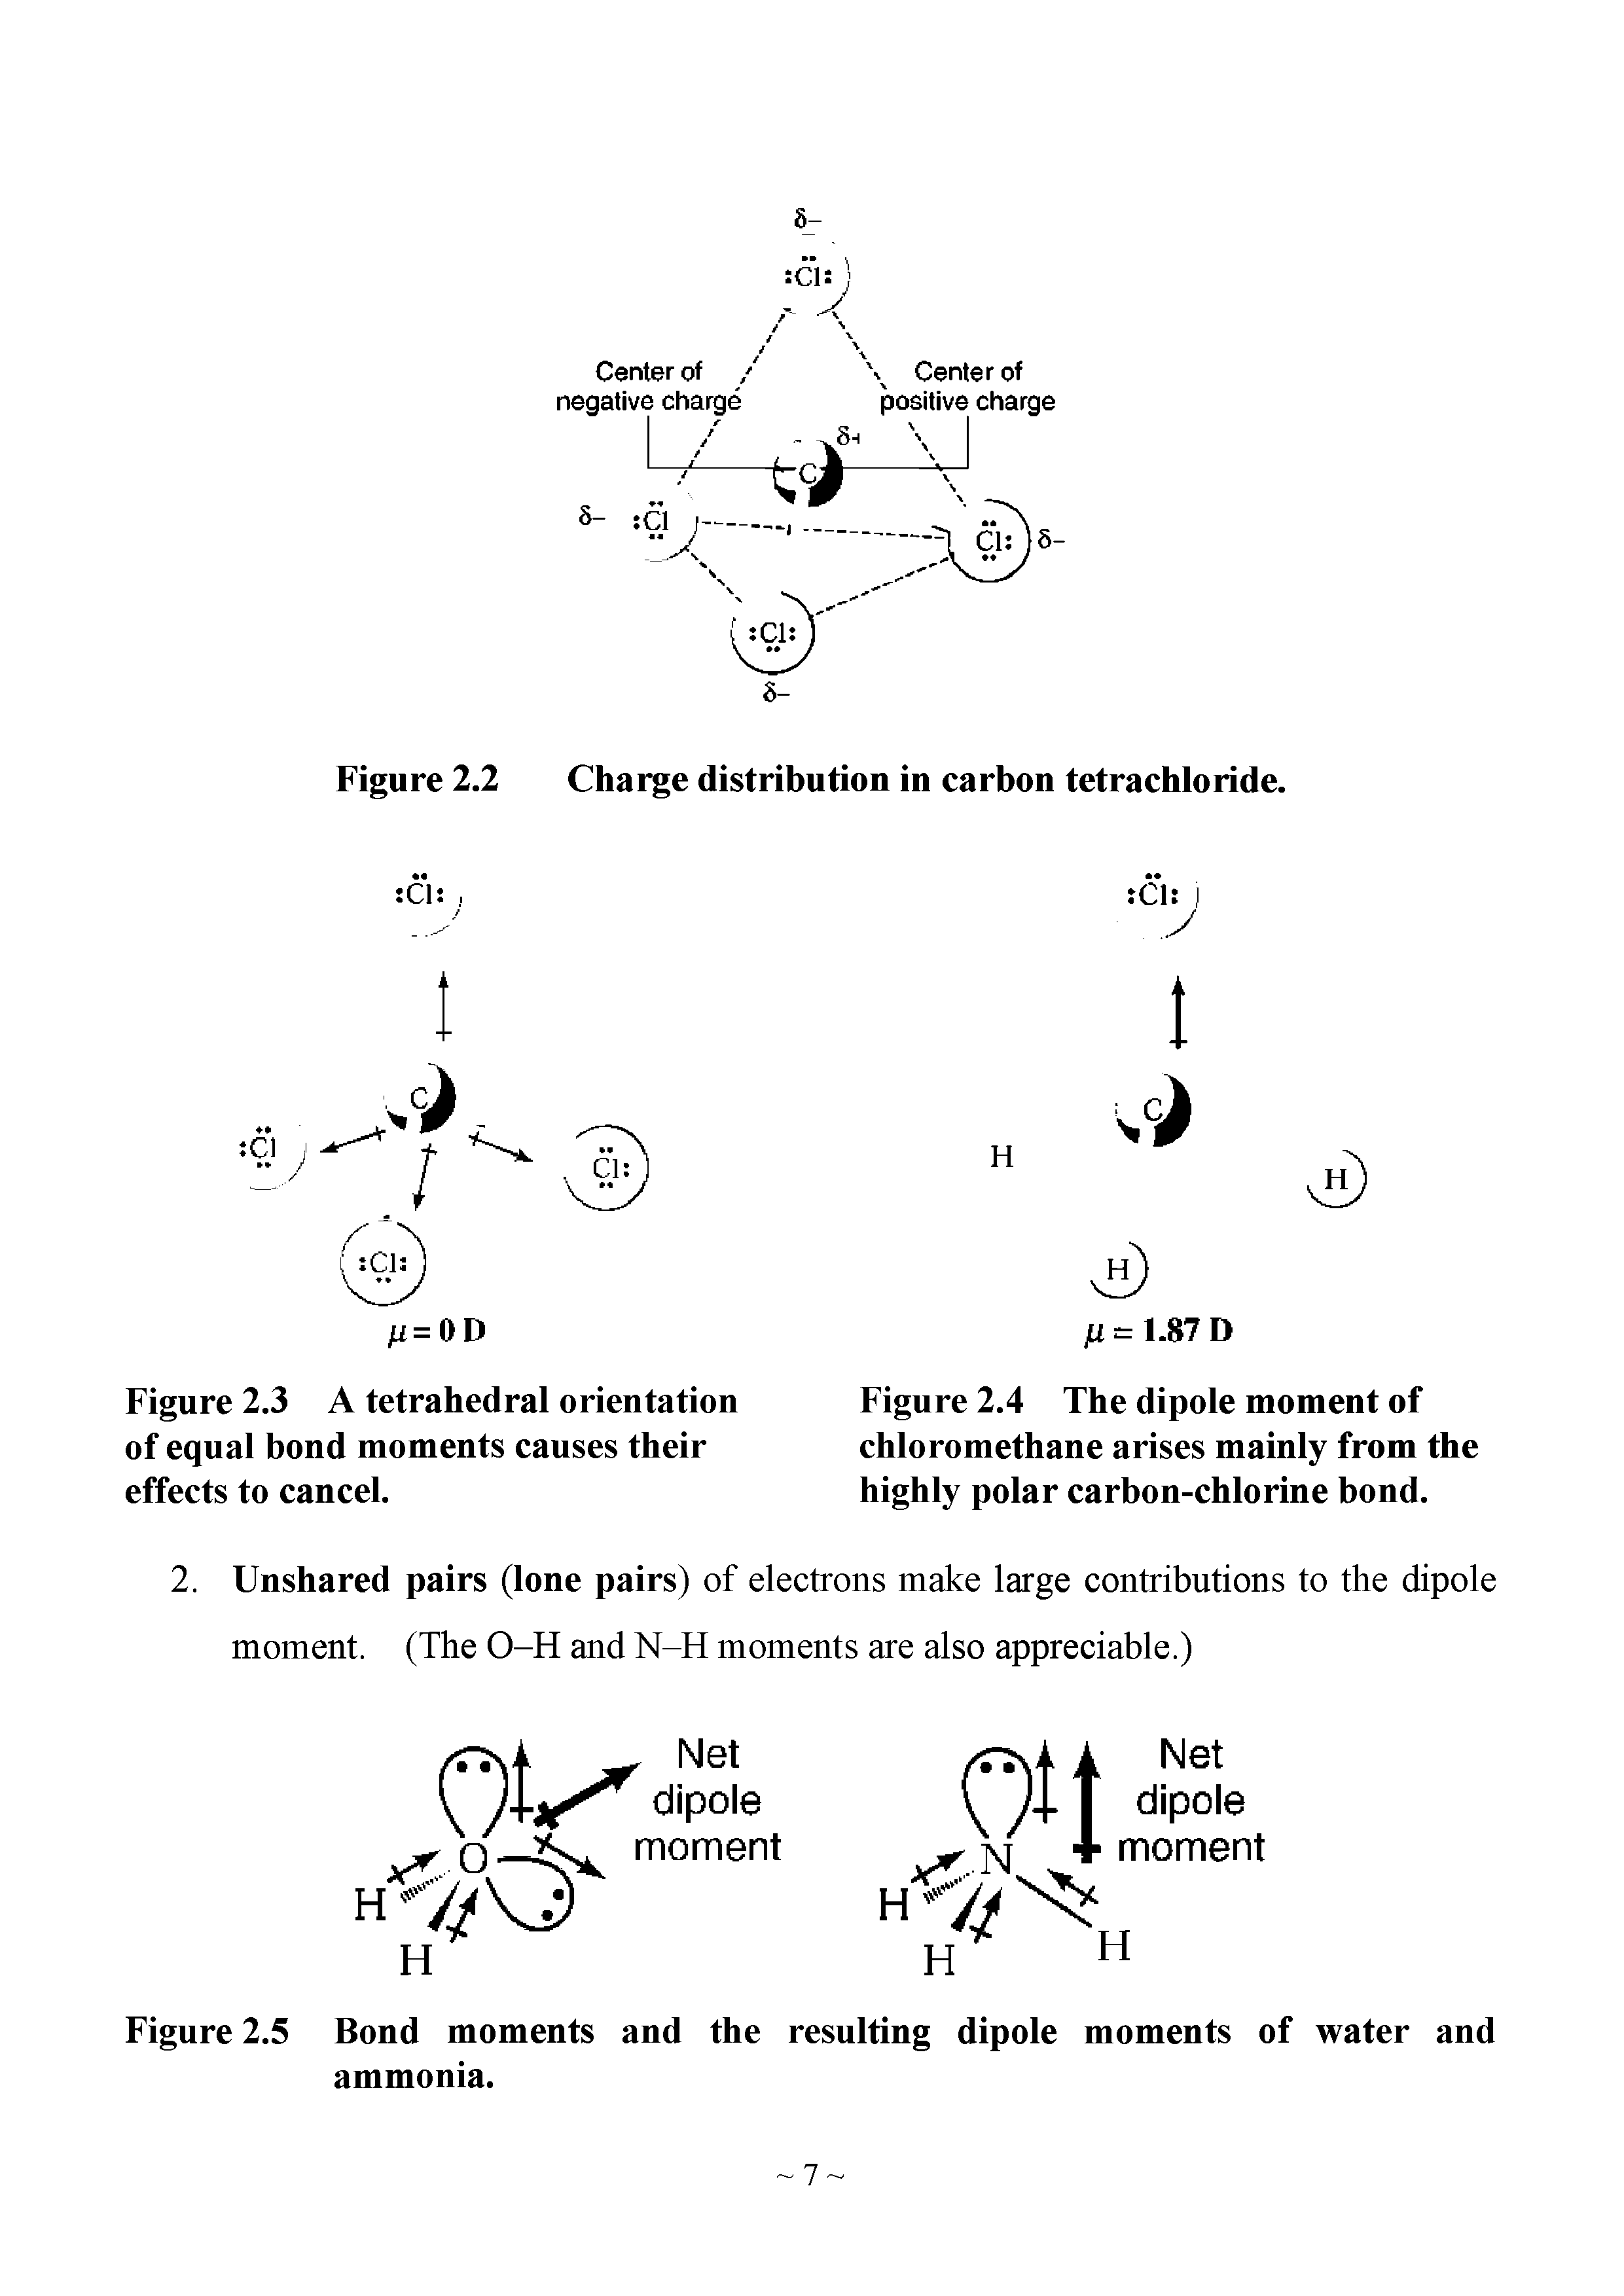 Figure 2.5 Bond moments and the resulting dipole moments of water and ammonia.